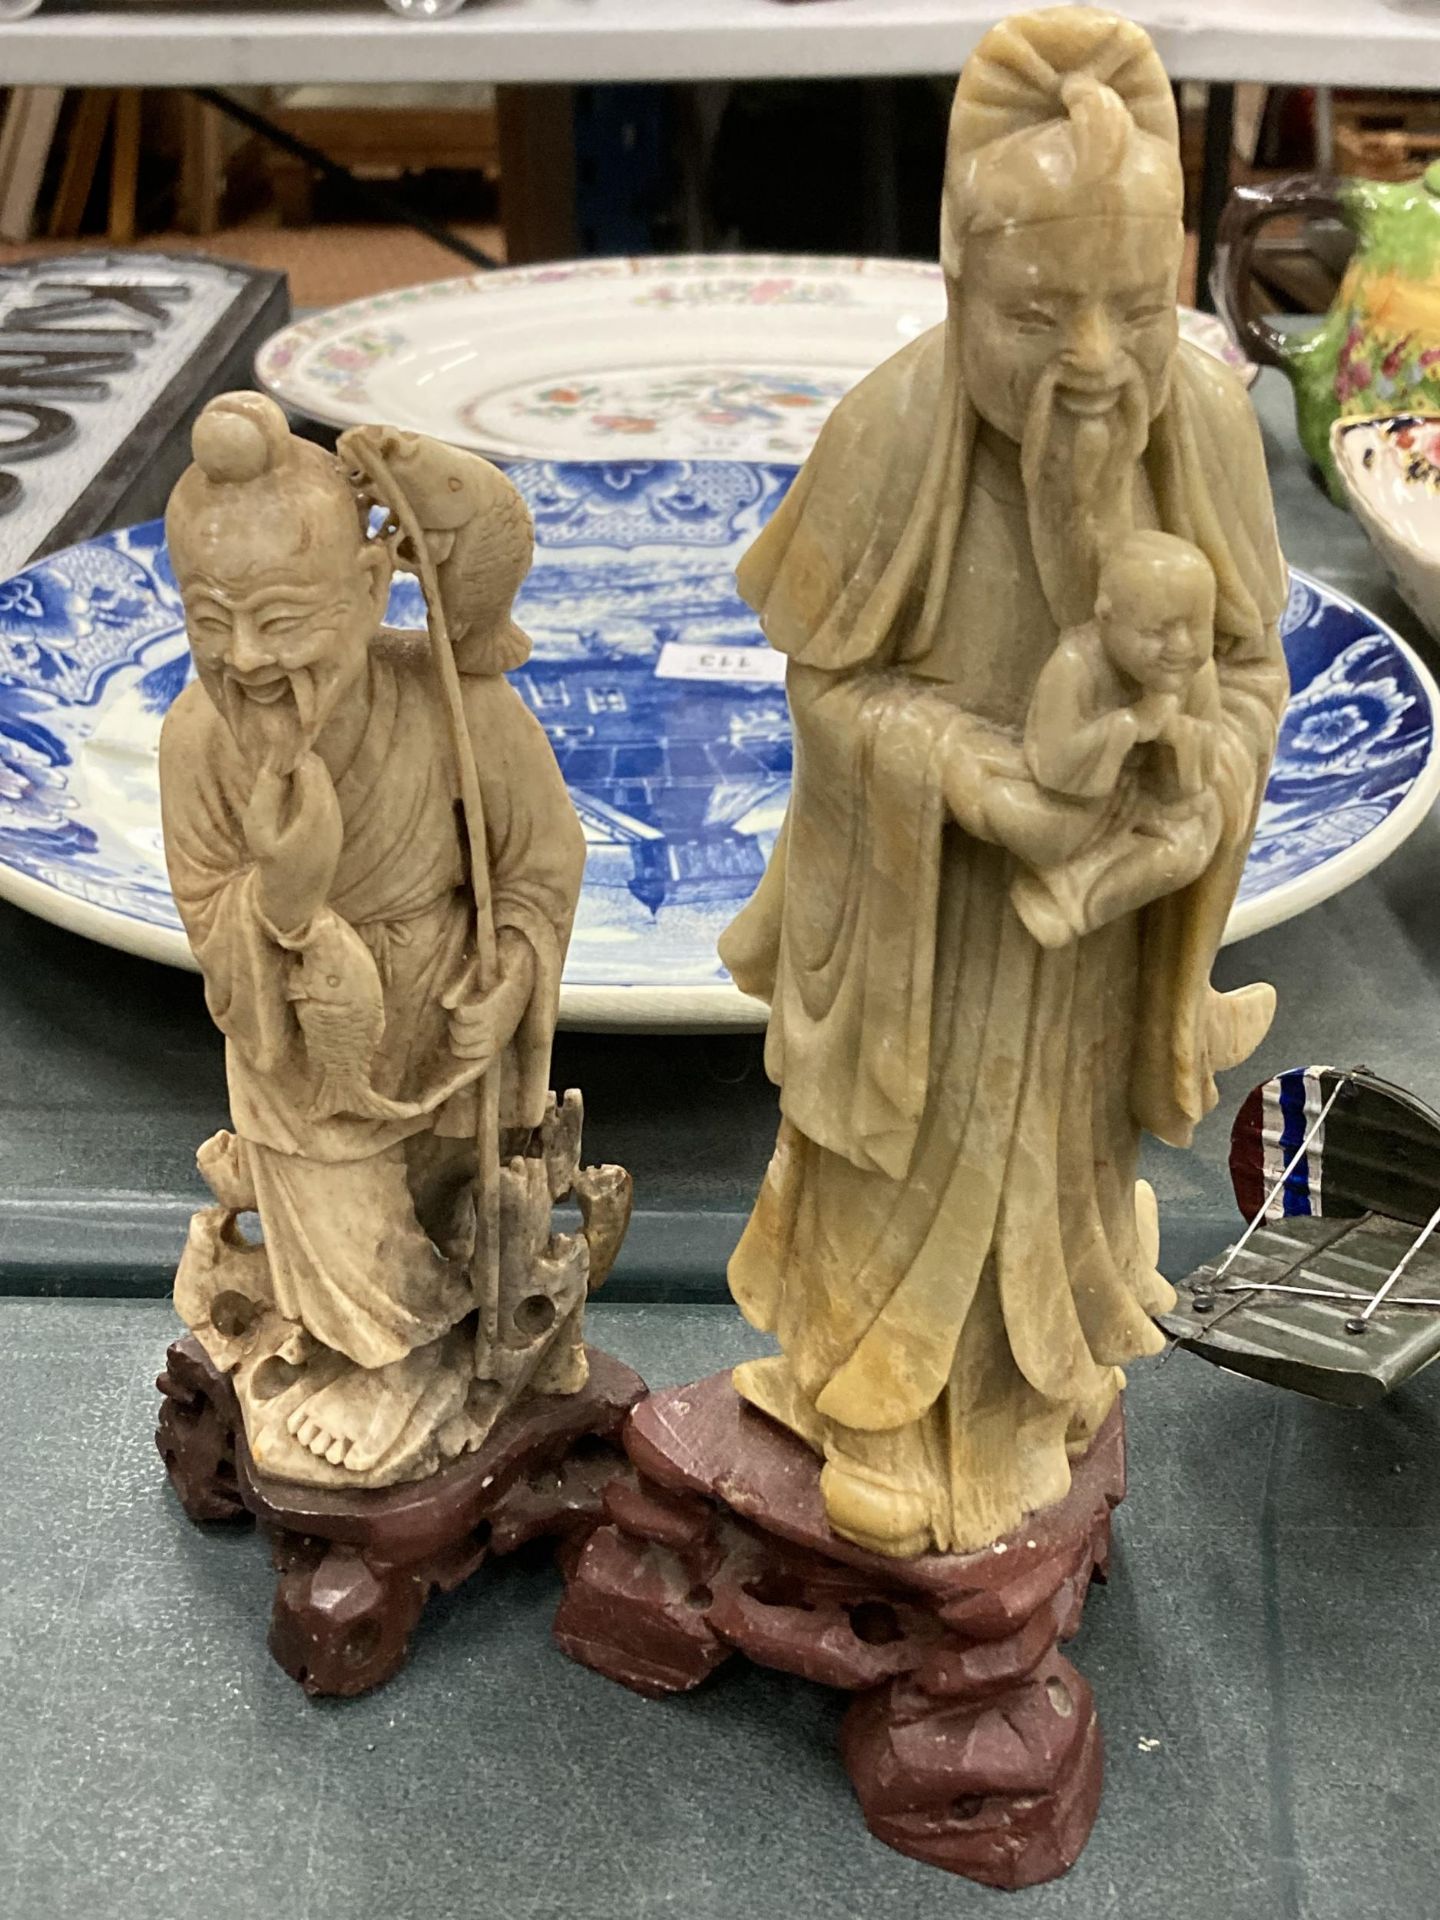 A PAIR OF CHINESE SOAPSTONE FIGURES ON WOODEN PLINTHS